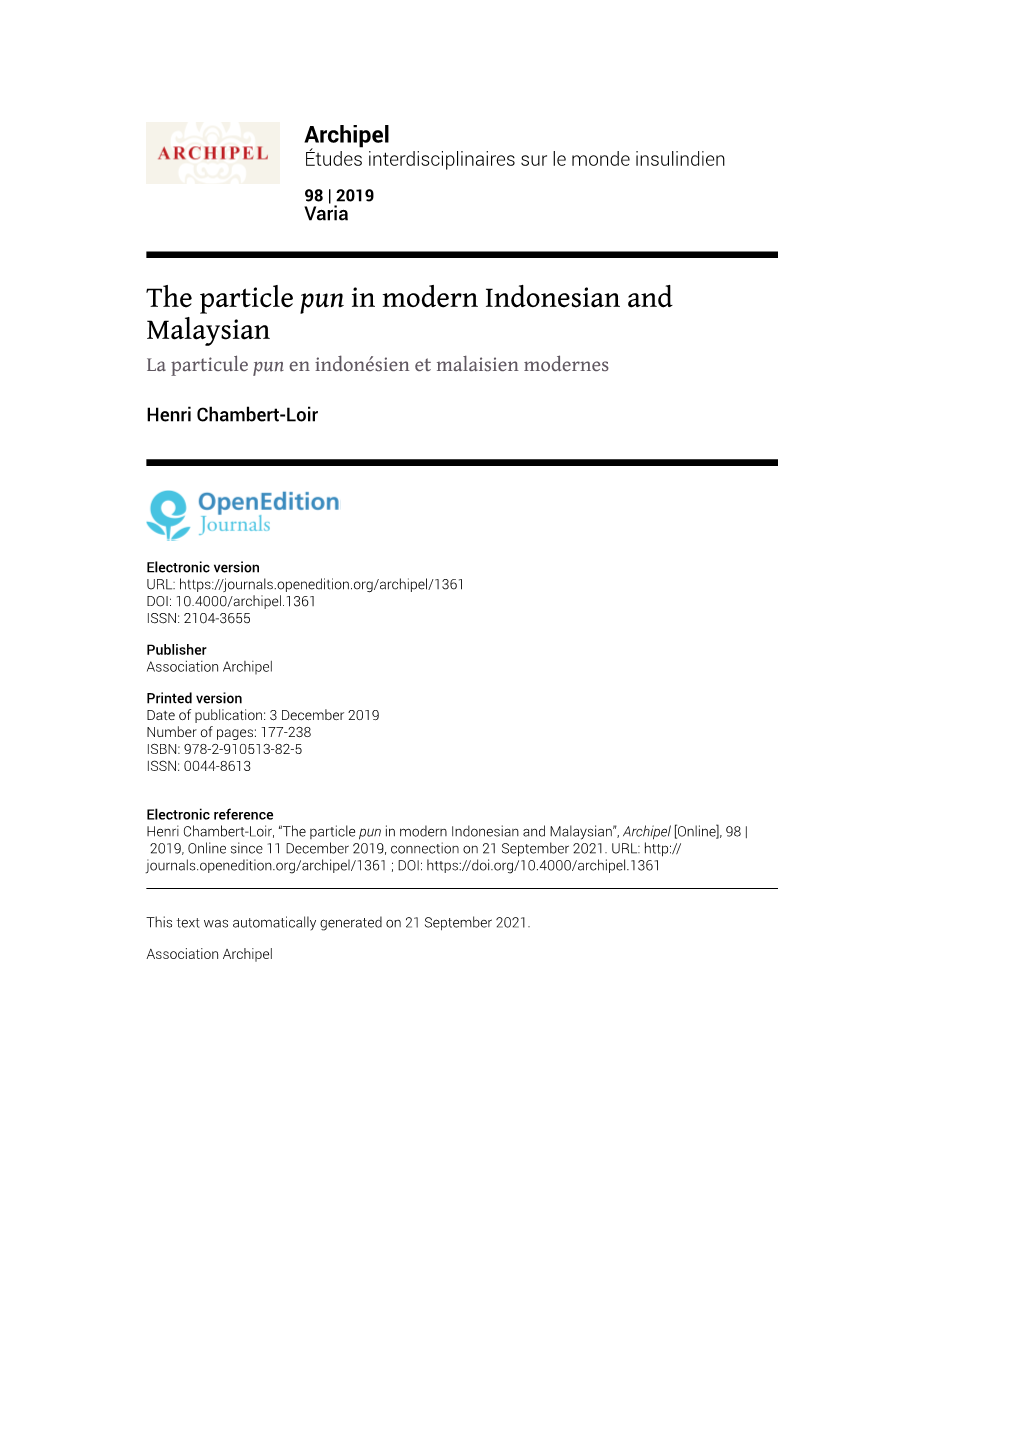 Archipel, 98 | 2019 the Particle Pun in Modern Indonesian and Malaysian 2